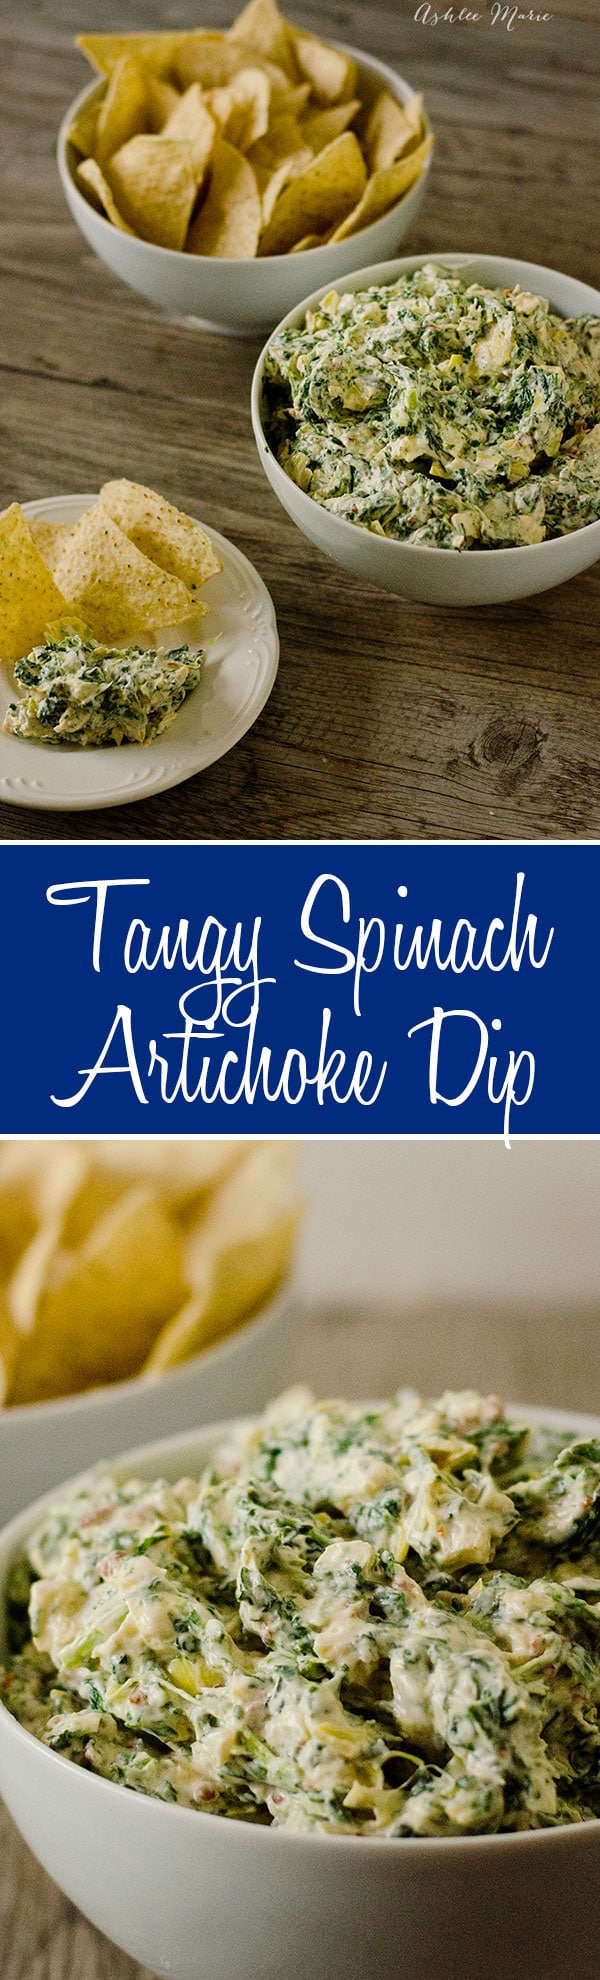 a cold spinach and artichoke dip, easy to make and tastes amazing